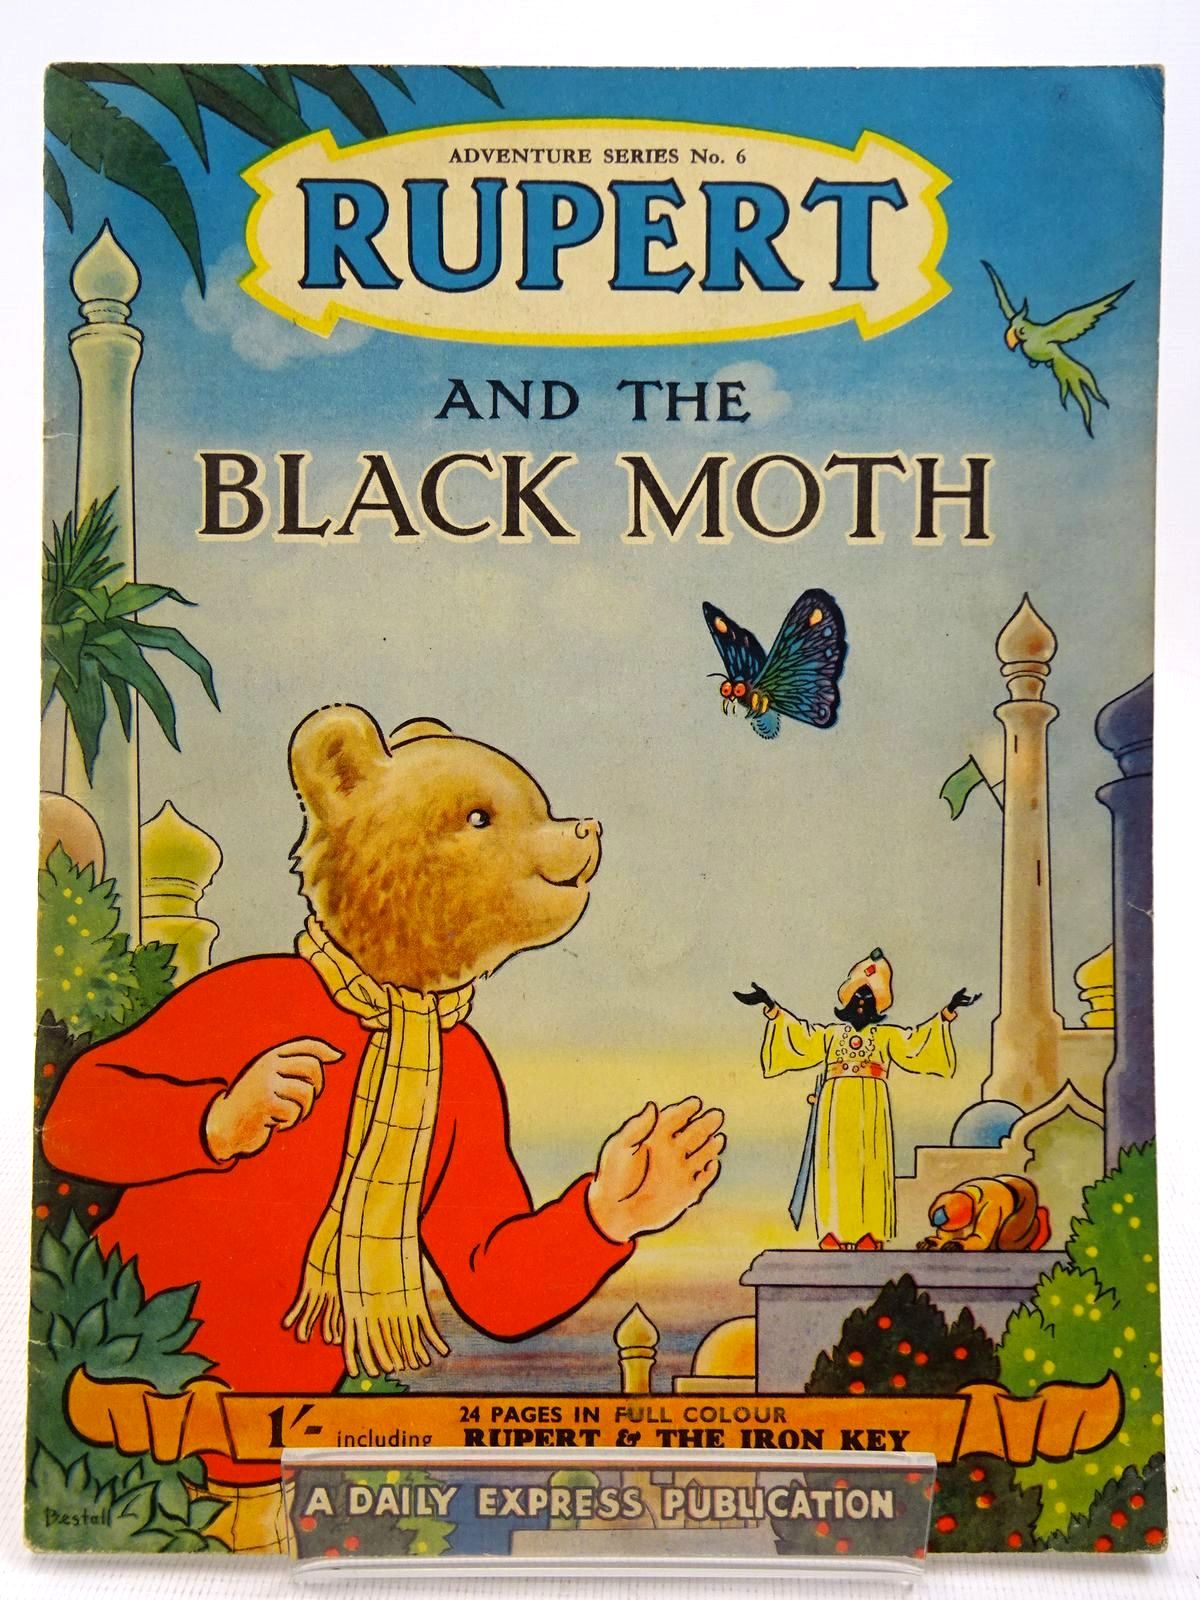 Photo of RUPERT ADVENTURE SERIES No. 6 - RUPERT AND THE BLACK MOTH written by Bestall, Alfred illustrated by Bestall, Alfred published by Daily Express (STOCK CODE: 2128598)  for sale by Stella & Rose's Books